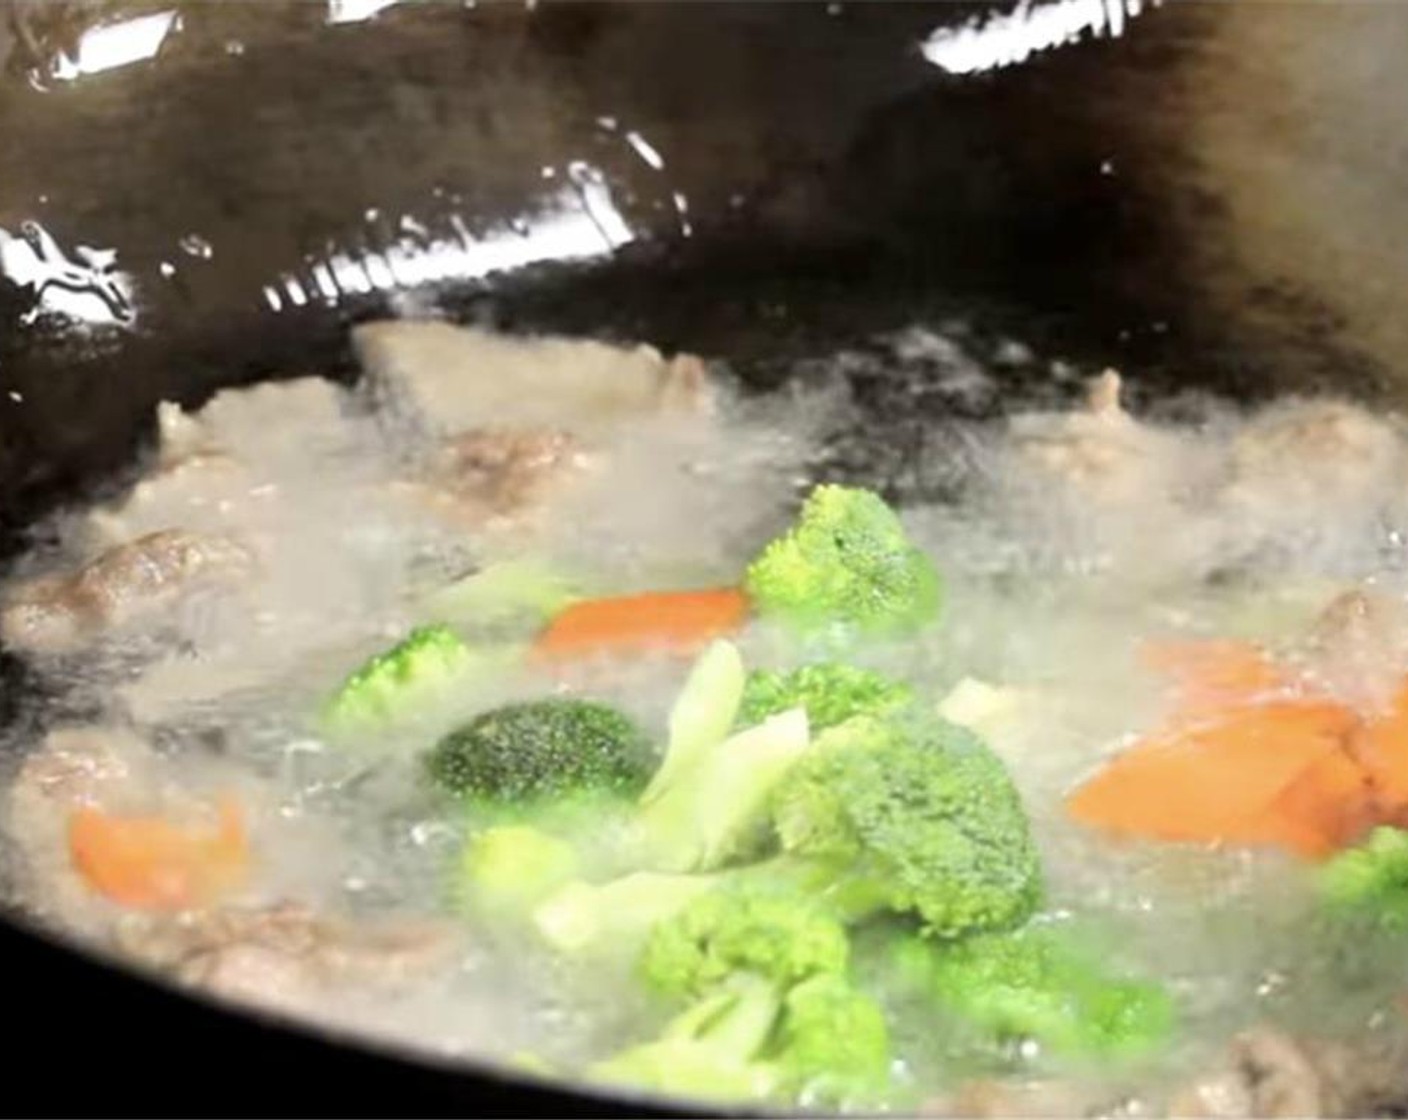 step 11 In a wok or pan, heat up some Vegetable Oil (as needed). Once it reaches 250 degrees F (120 degrees C), fry the beef. Then continue to heat the oil to 325 degrees F (160 degrees C). Move the meat around to get an even cook. Add the broccoli and carrot for 20 seconds. Strain from wok.